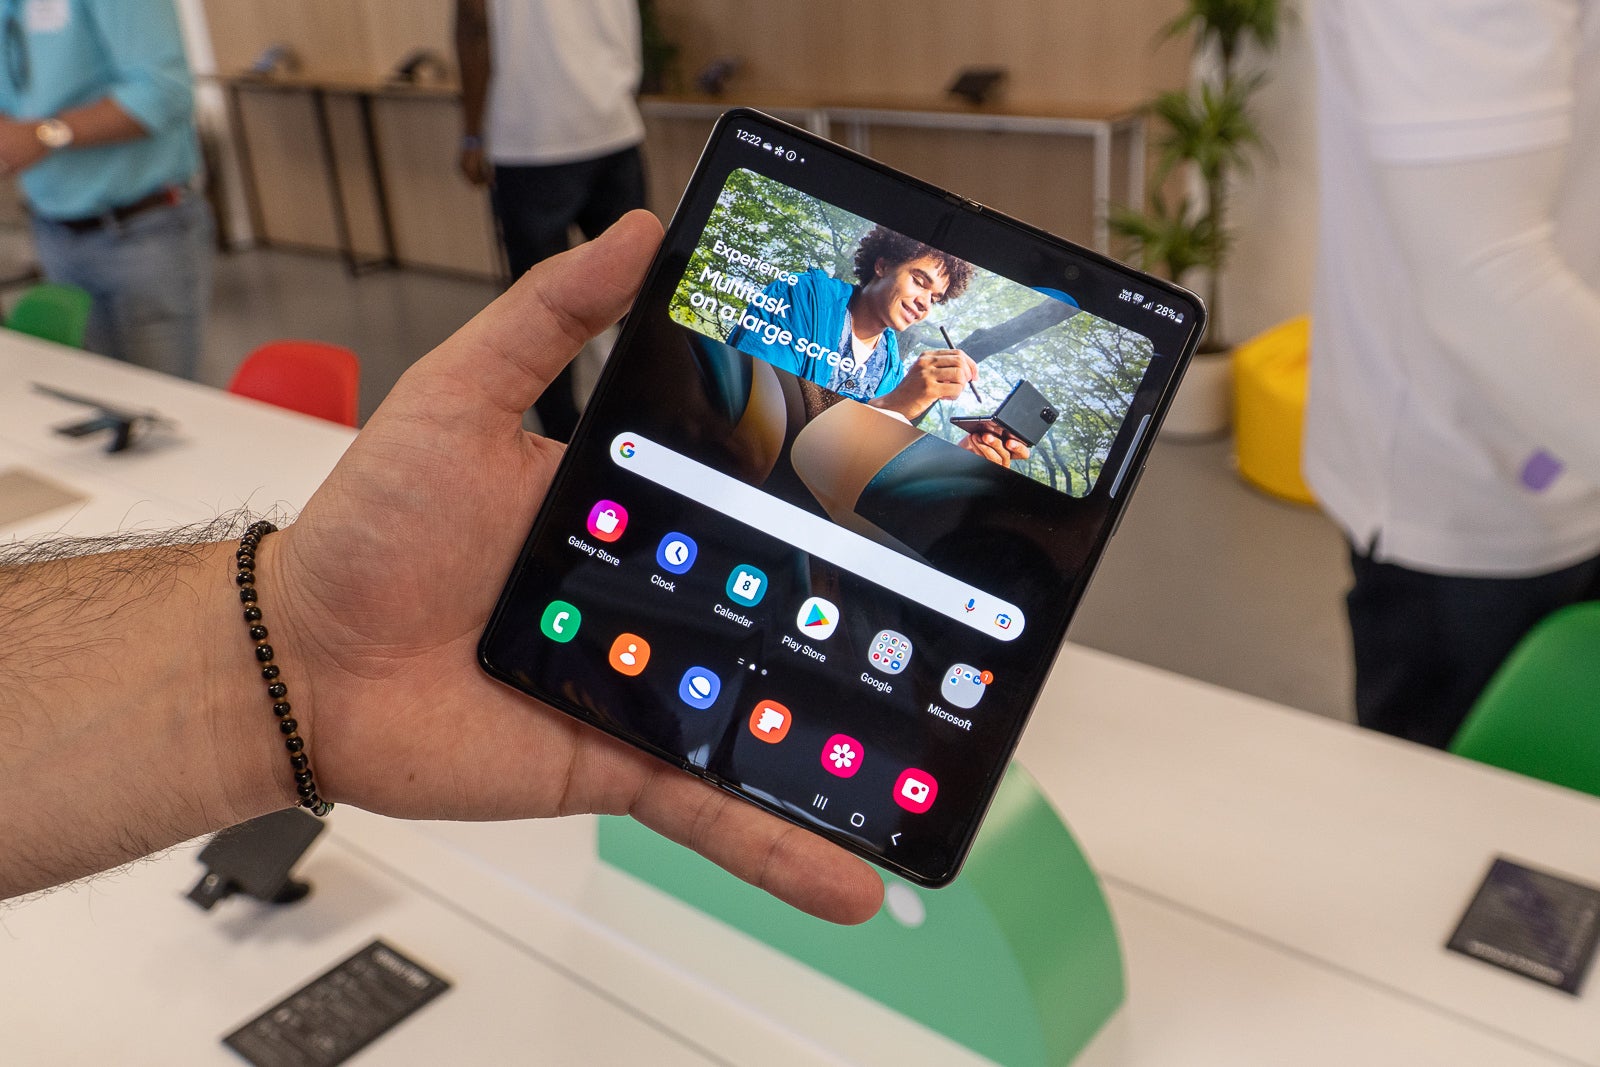 (Image Credit - PhoneArena) Hands-on with the Z Fold 4 - Samsung Galaxy Z Fold 4 release date, price, and features